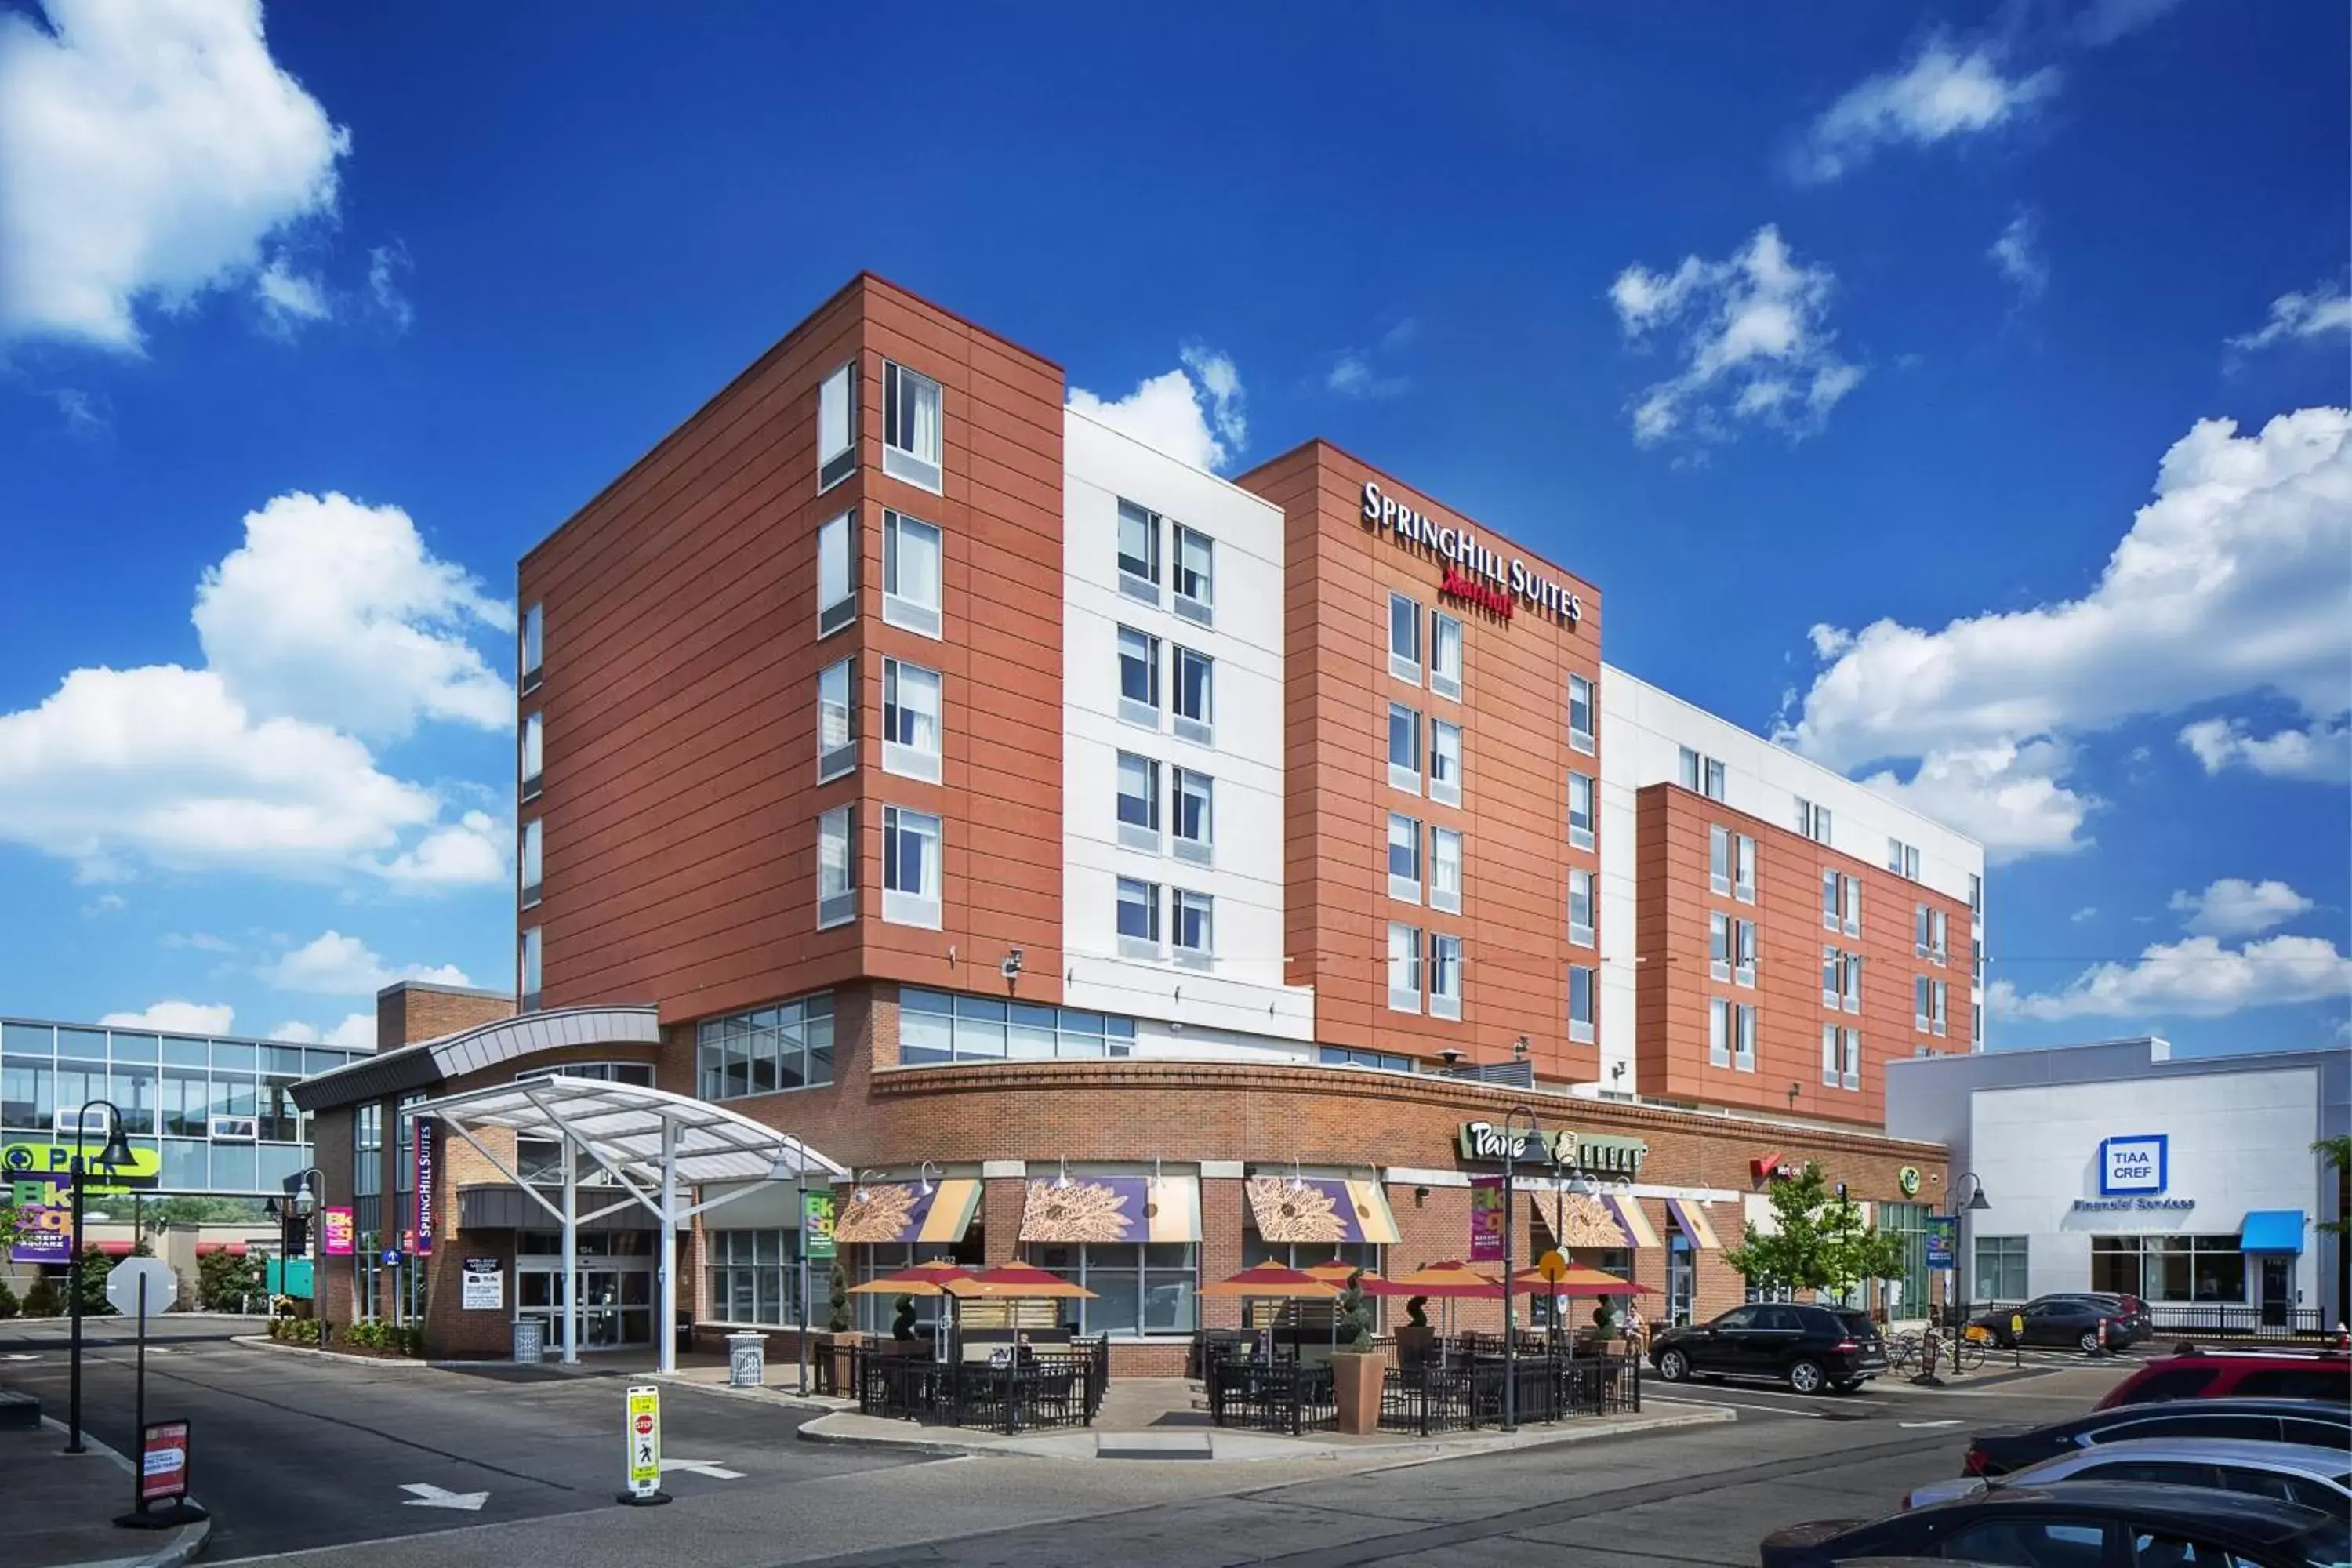 Property Building in SpringHill Suites by Marriott Pittsburgh Bakery Square